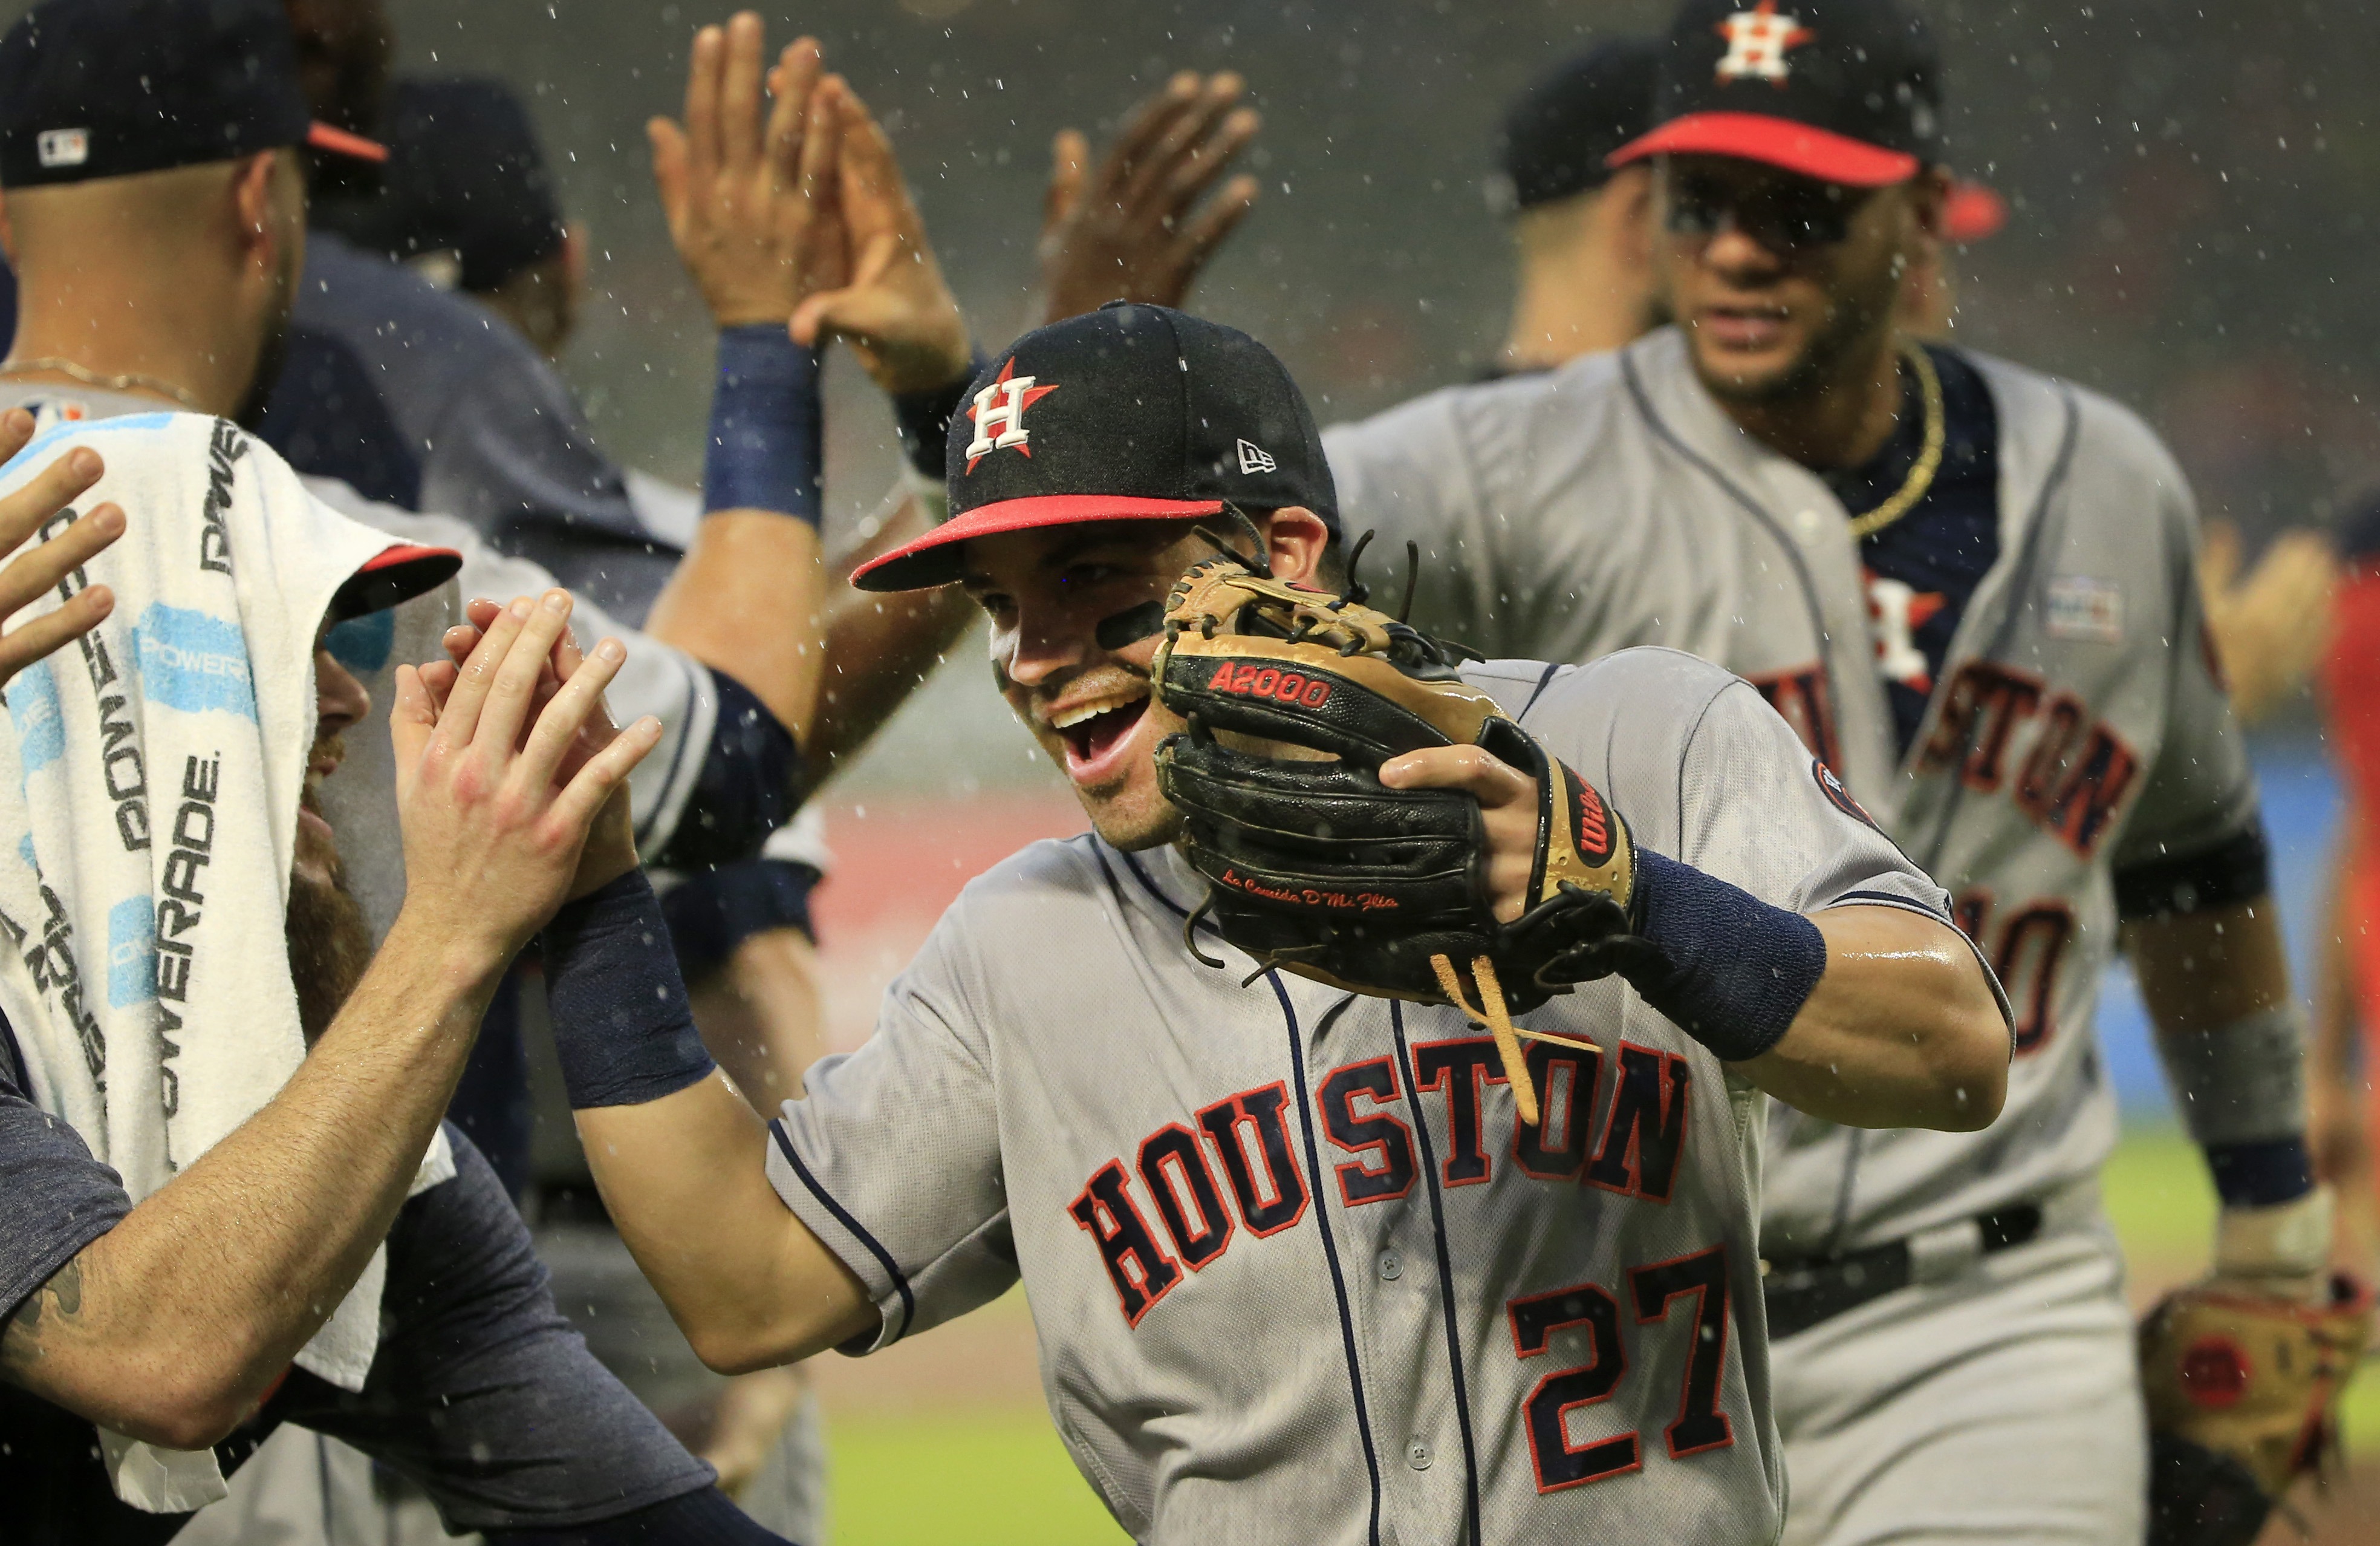 Baseball's Houston Astros To Switch Leagues In 2013 : The Two-Way